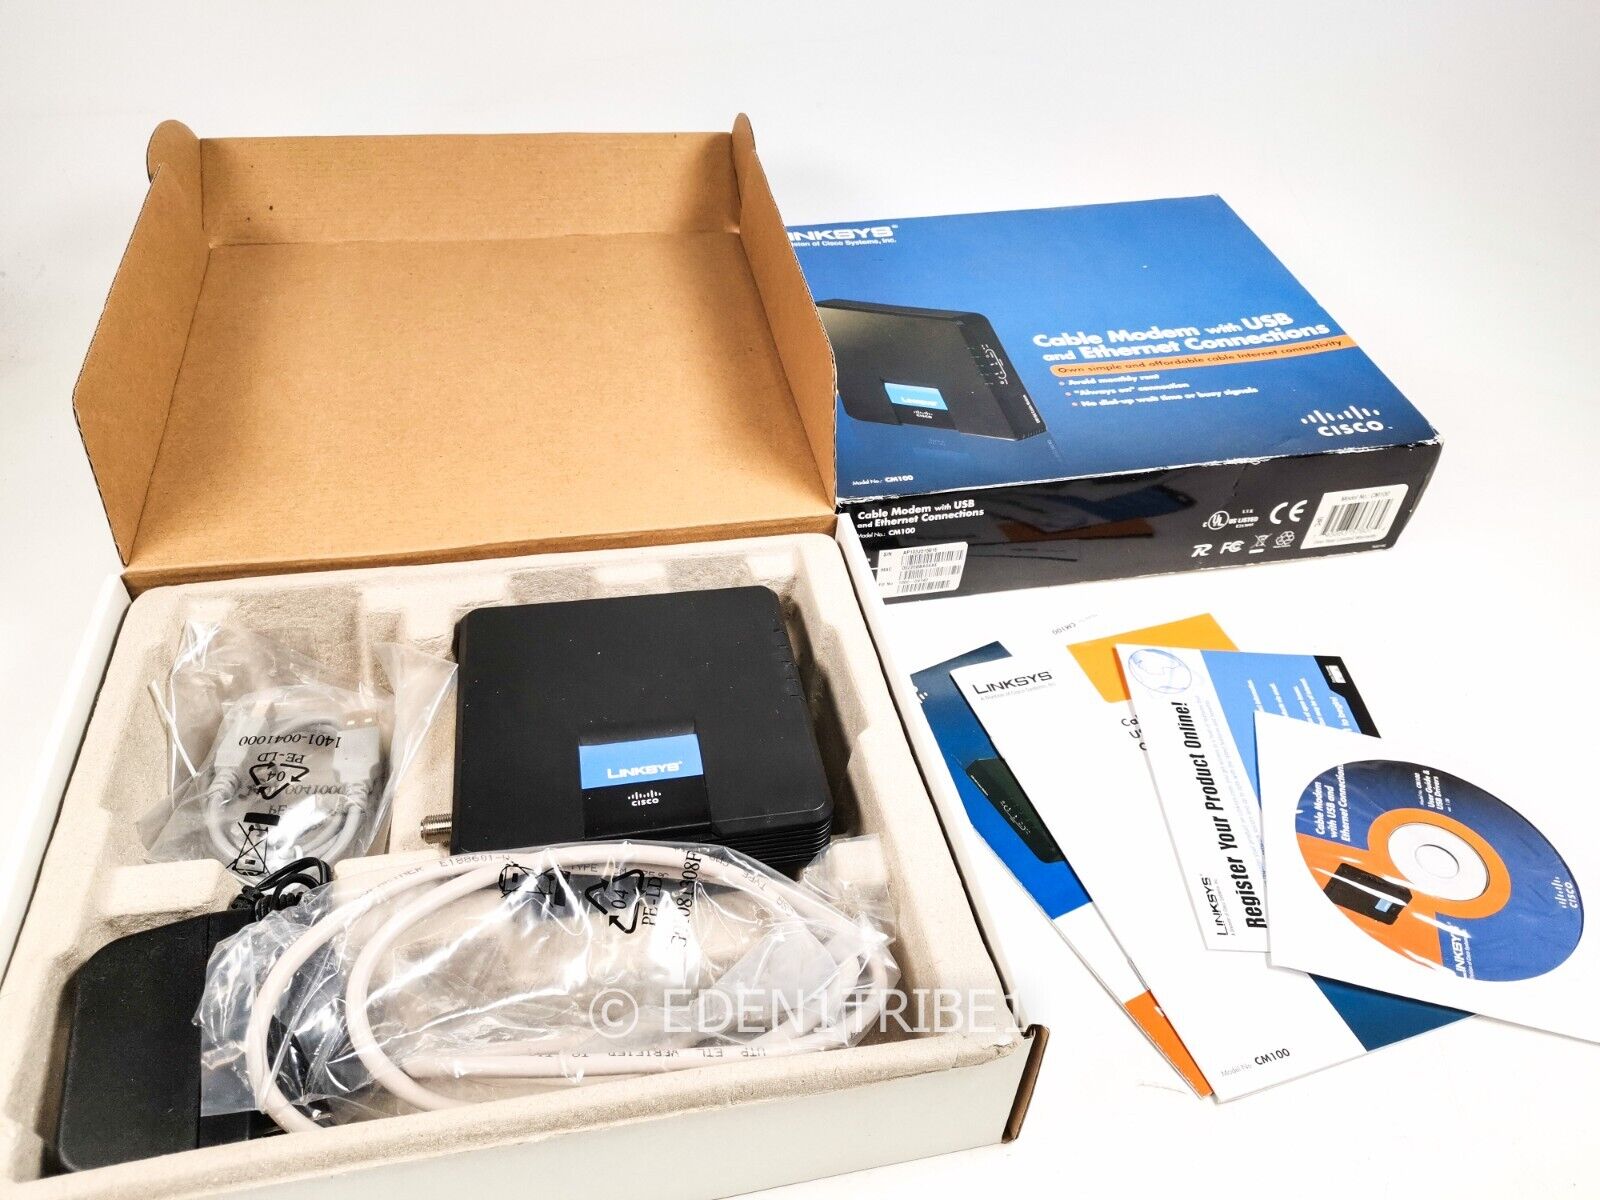 CISCO Linksys CM100 Modem Cable Modem With USB And Ethernet Connections